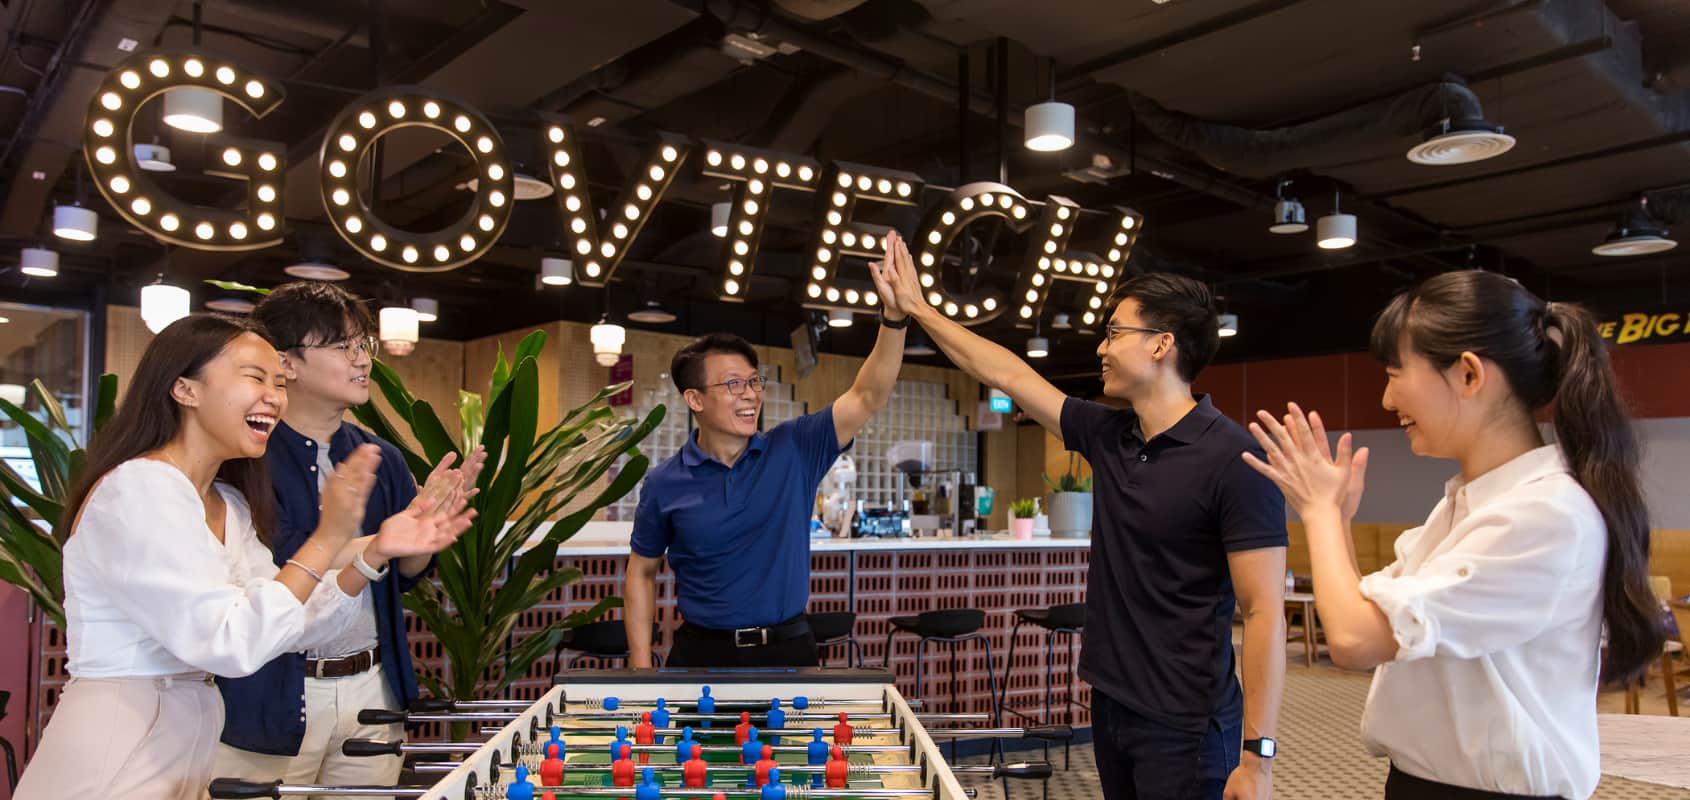 Employees working at GovTech bonding over a game of foosball